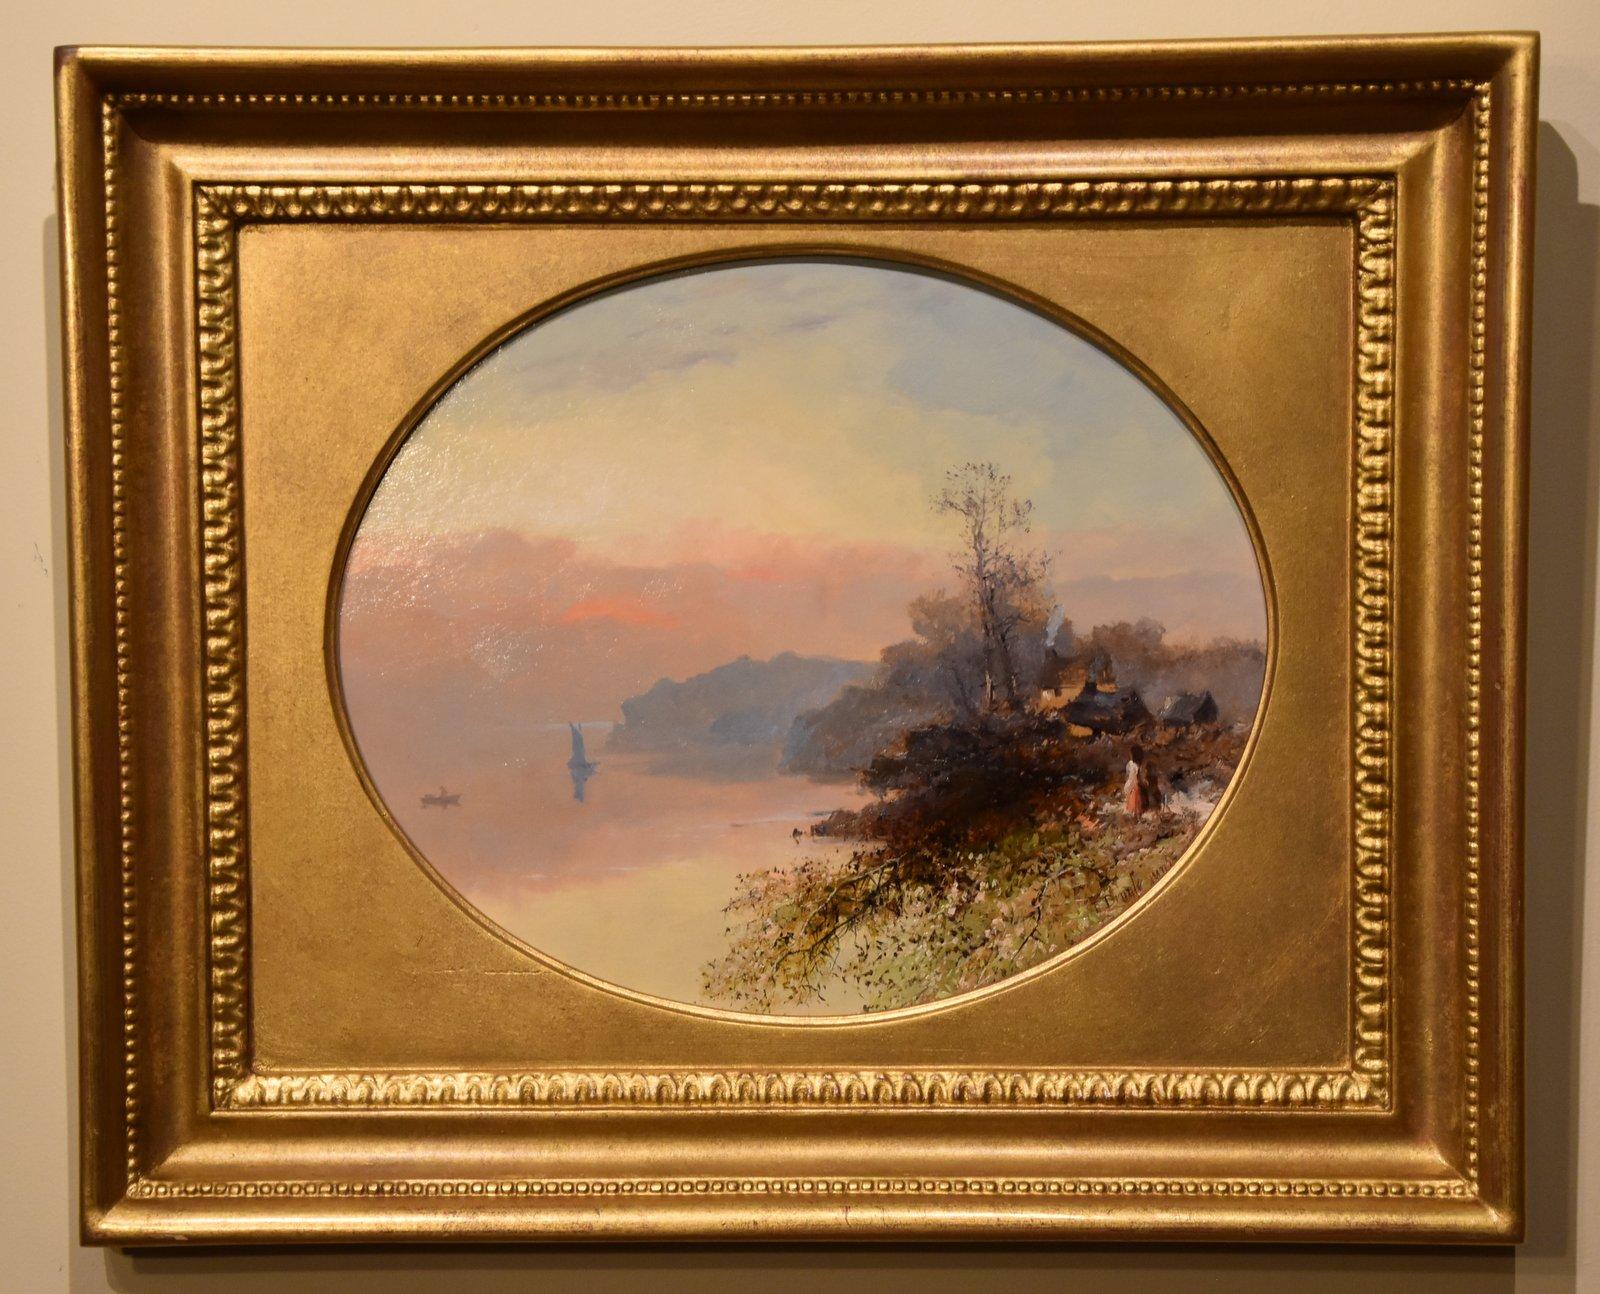 Oil Painting by Thomas Dingle Junior "Evening on The Coast" 1814 - 1919. Born in Lambeth but settled in Devon painting local views. He exhibited at the Royal society of British artists and in Bristol. Oil on board. Oval . Signed. 

Dimensions